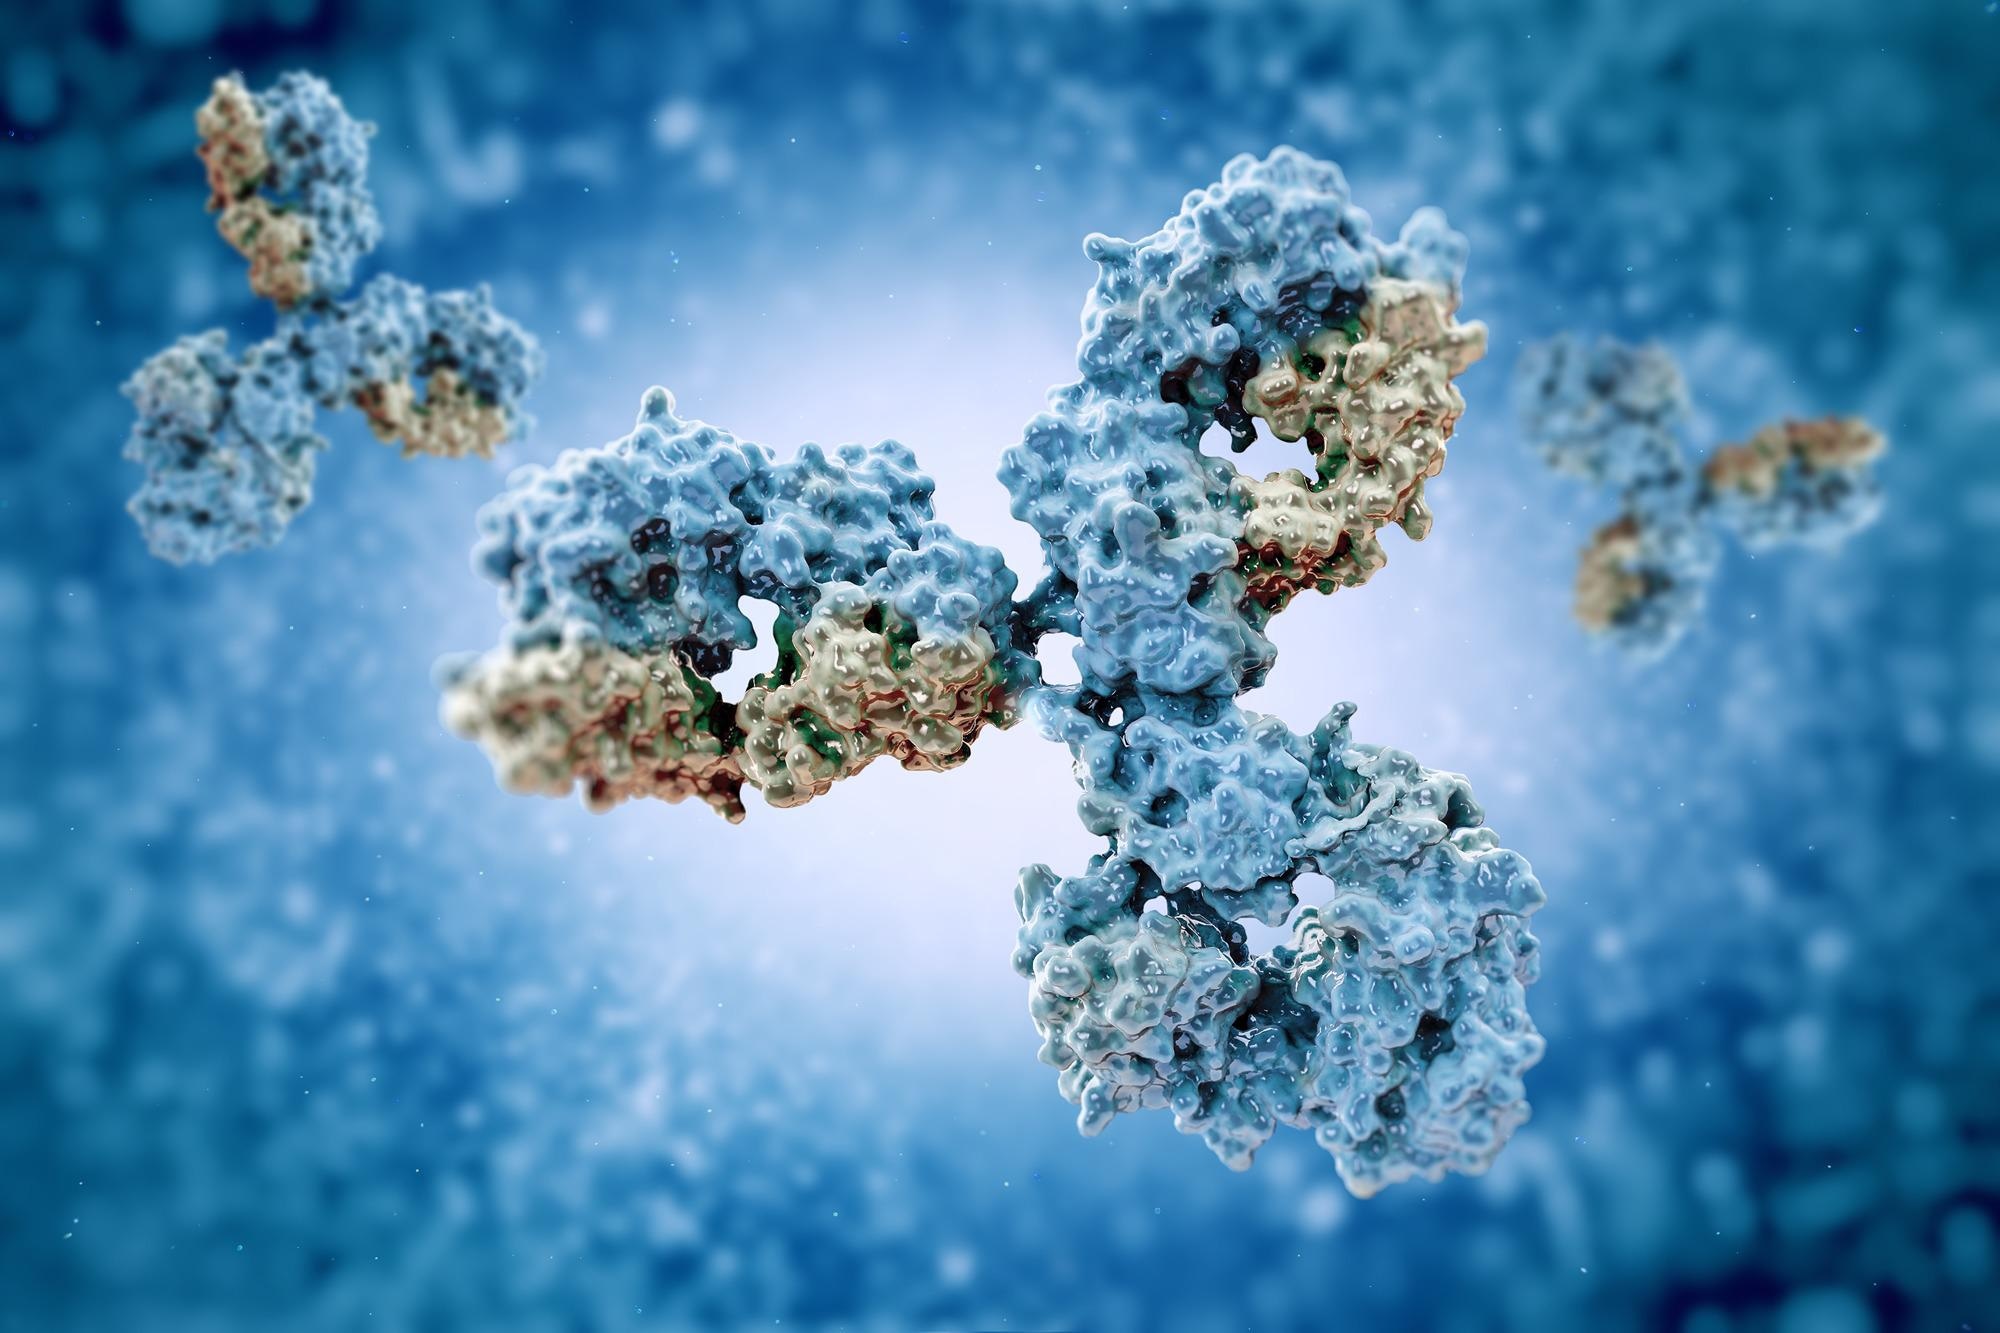 Study: Attenuation of antibody titres during 3-6 months after the second dose of the BNT162b2 vaccine depends on sex, with age and smoking as risk factors for lower antibody titres at 6 months. Image Credit: vitstudio / Shutterstock